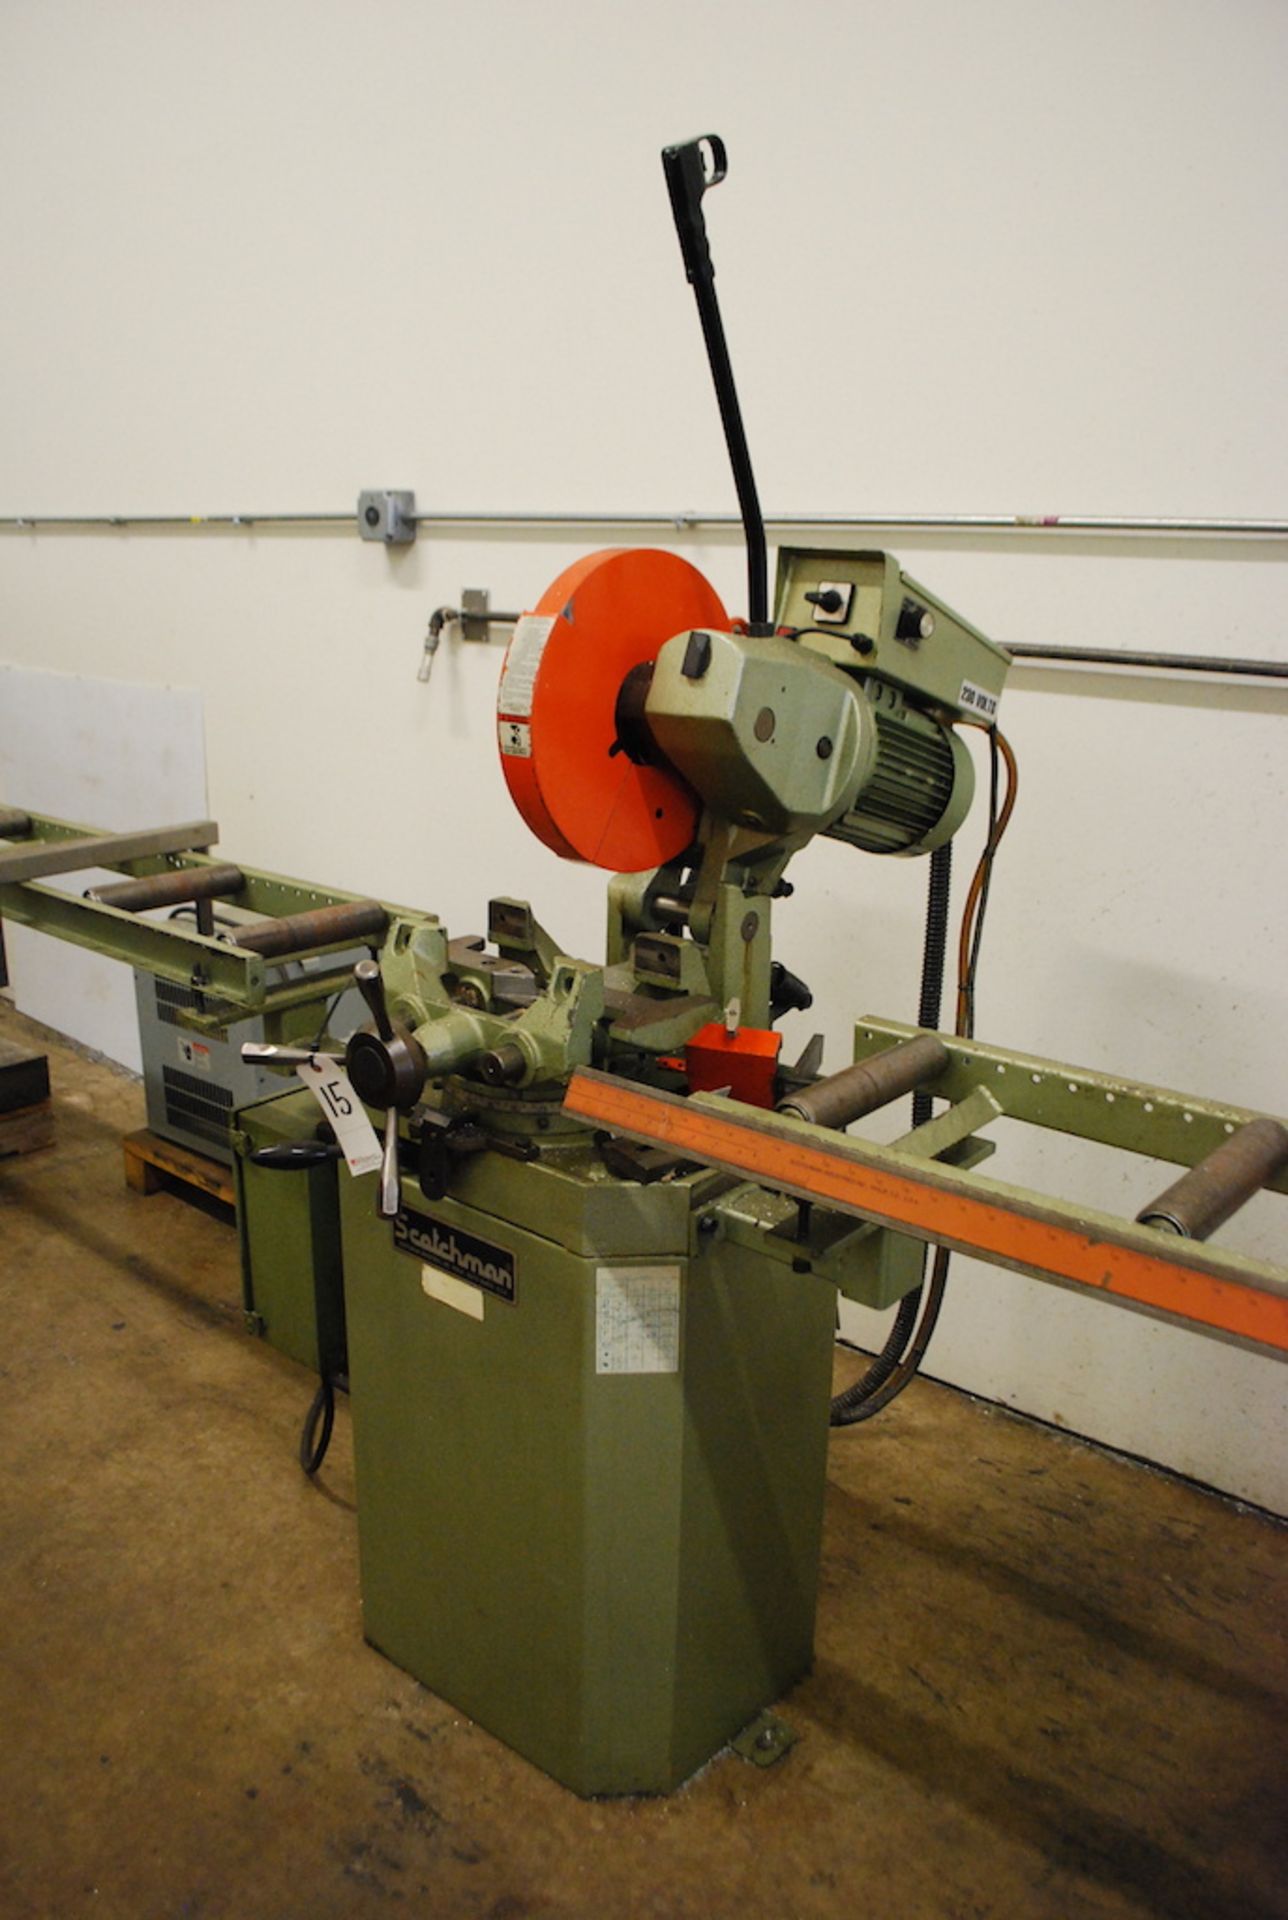 SCOTCHMAN 14” MODEL 350HT COLD SAW: S/N 58120901 (2001); MANUAL VISE; 5HP; 10' INFEED ROLLER